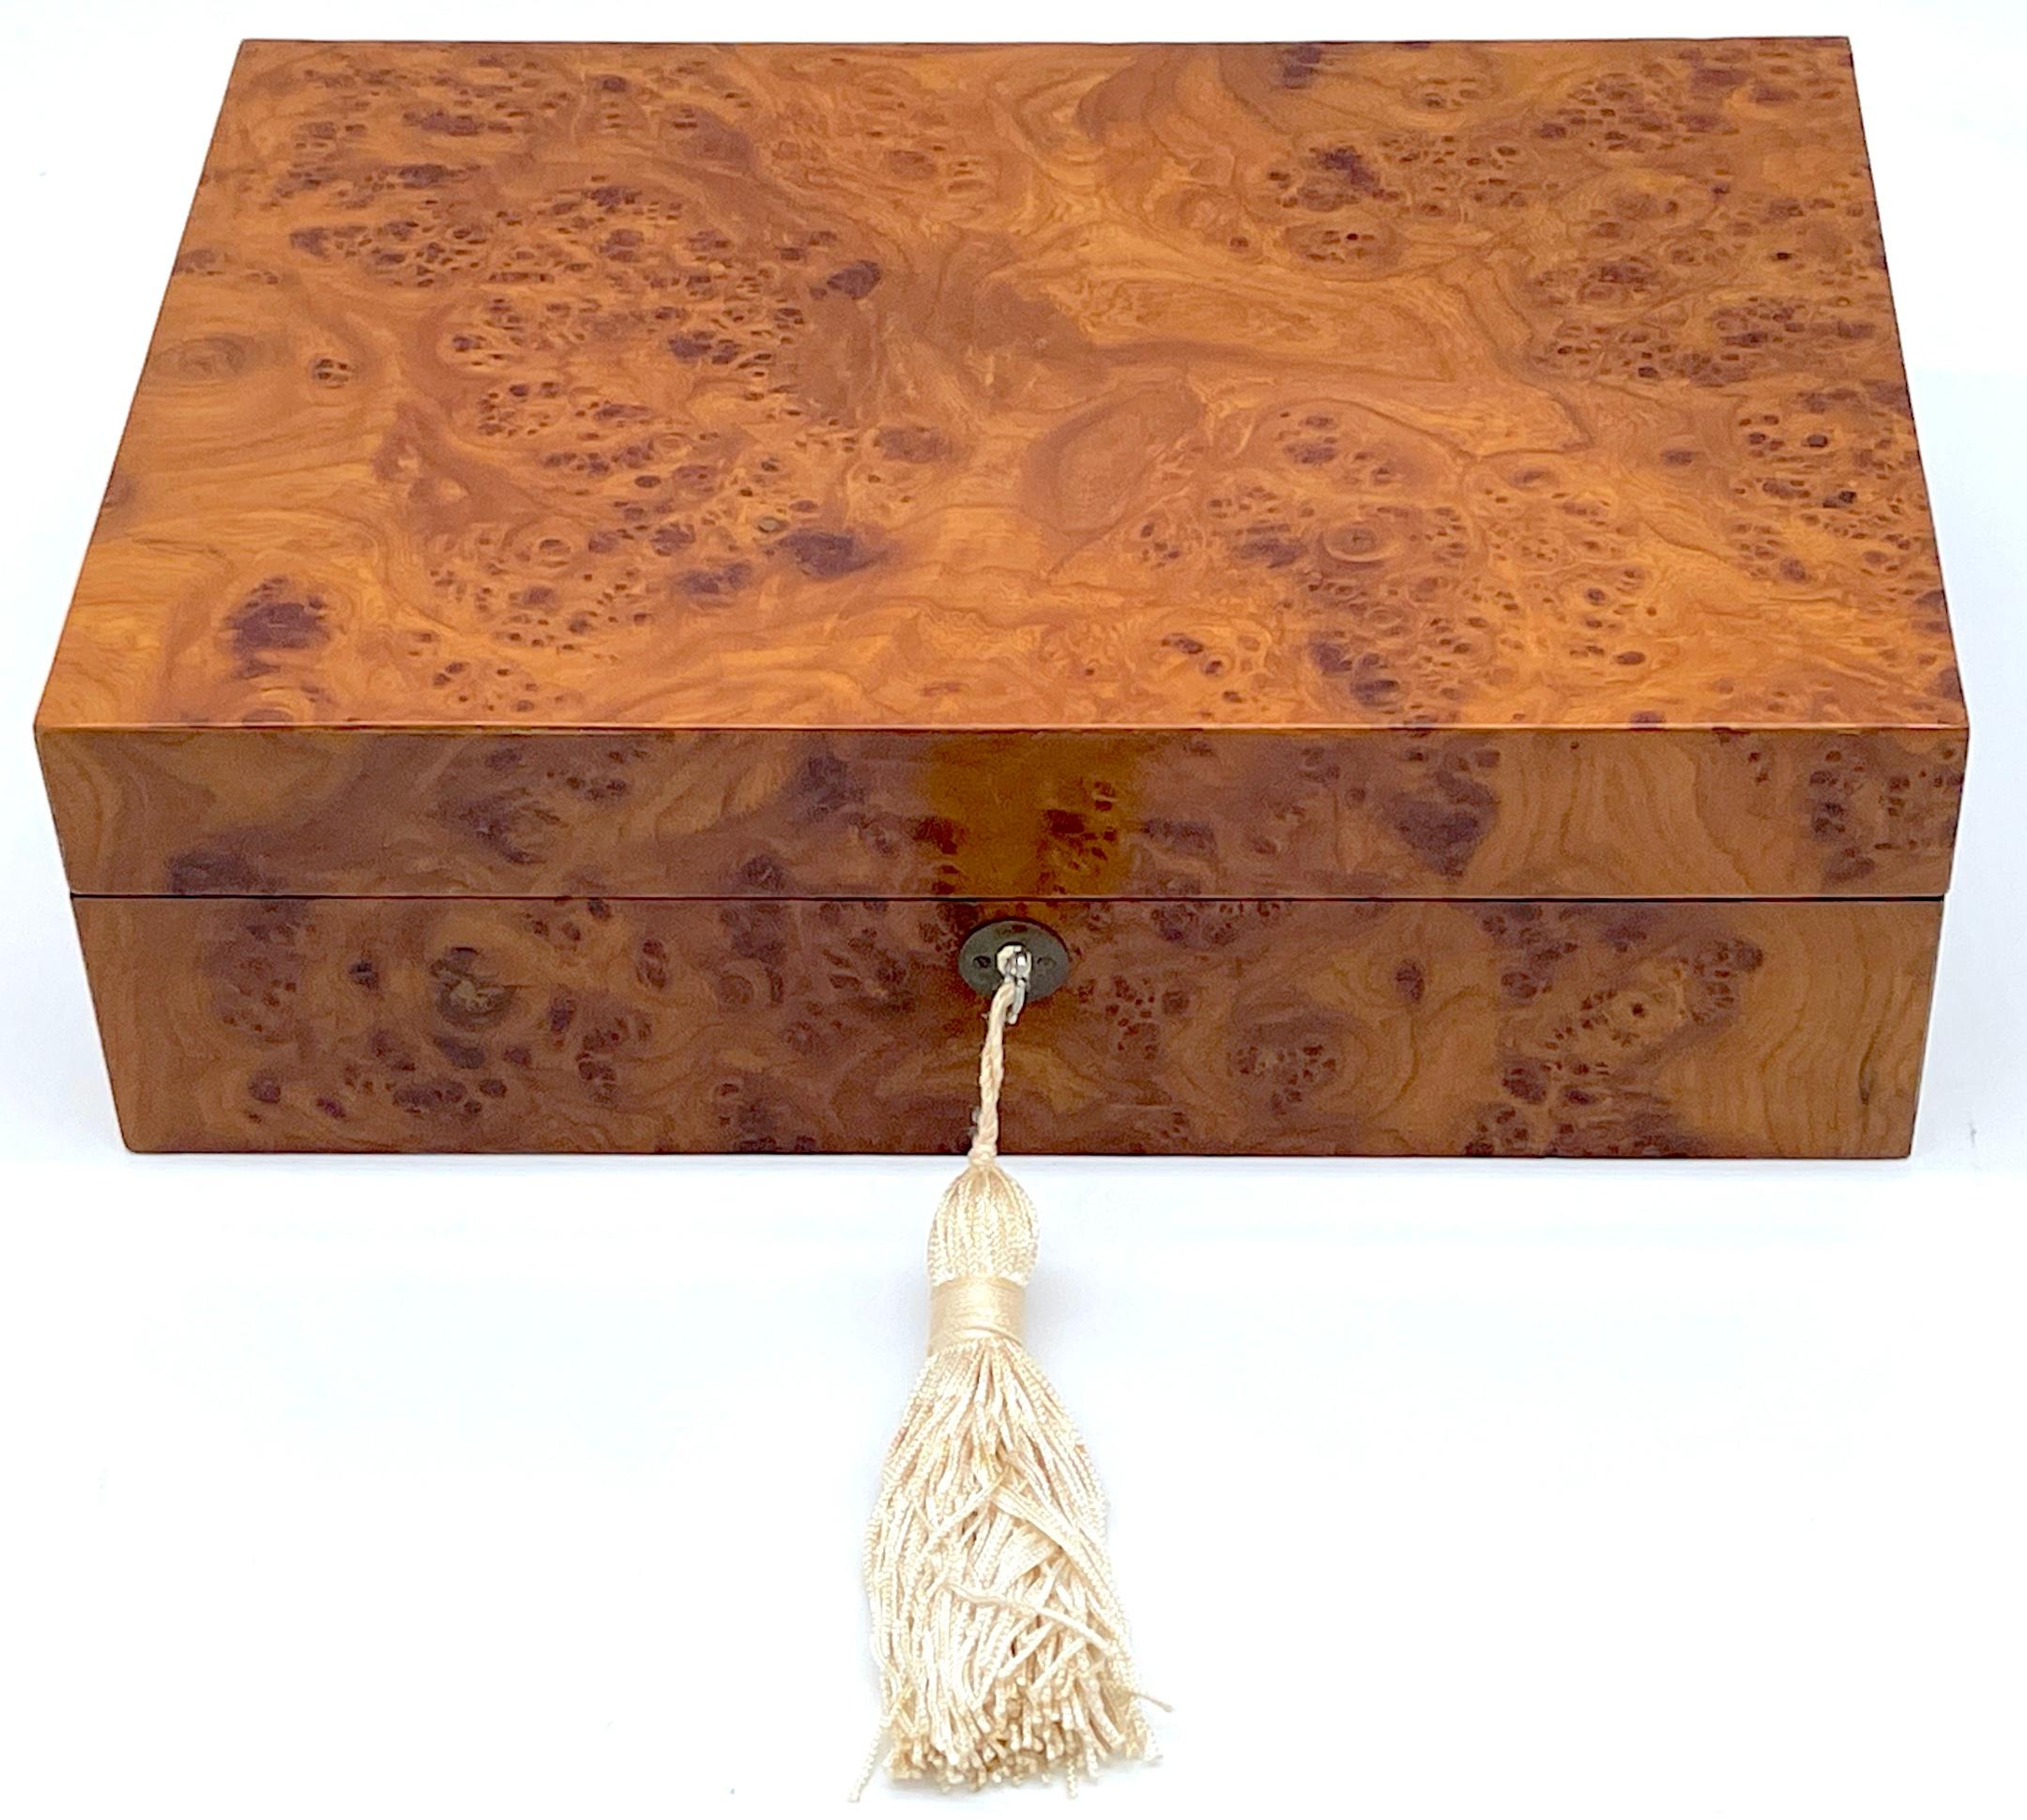 Modern Italian Carpathian Burl Wood Humidor with Tasseled Key
Italy, late 20th century 

A stunning modern Italian Carpathian burl wood humidor is a testament to late 20th-century craftsmanship from Italy. This humidor boasts a rectangular form